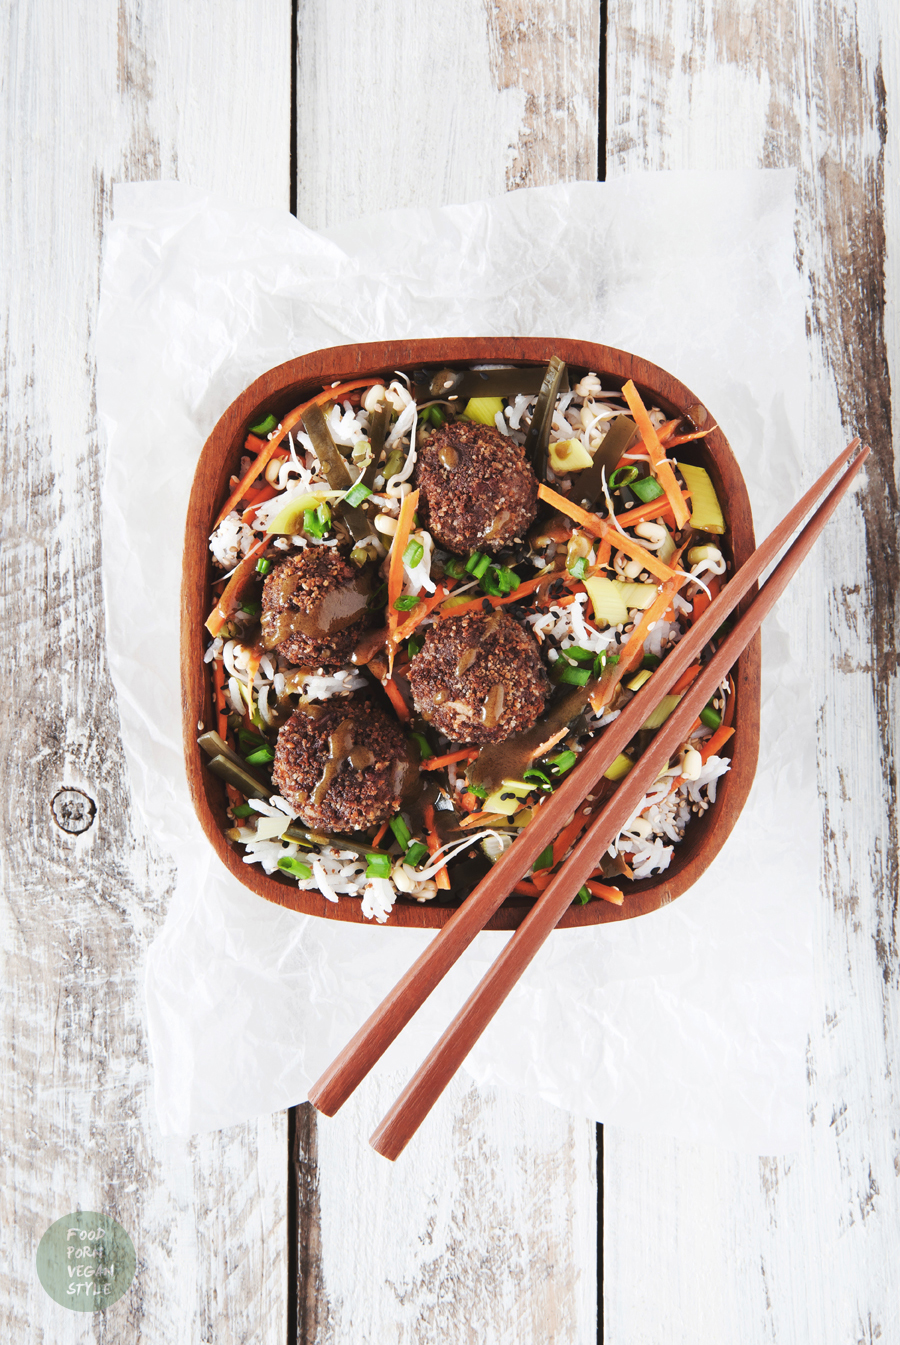 Vegan asian protein meatballs with adzuki beans, purple rice, five spice and miso